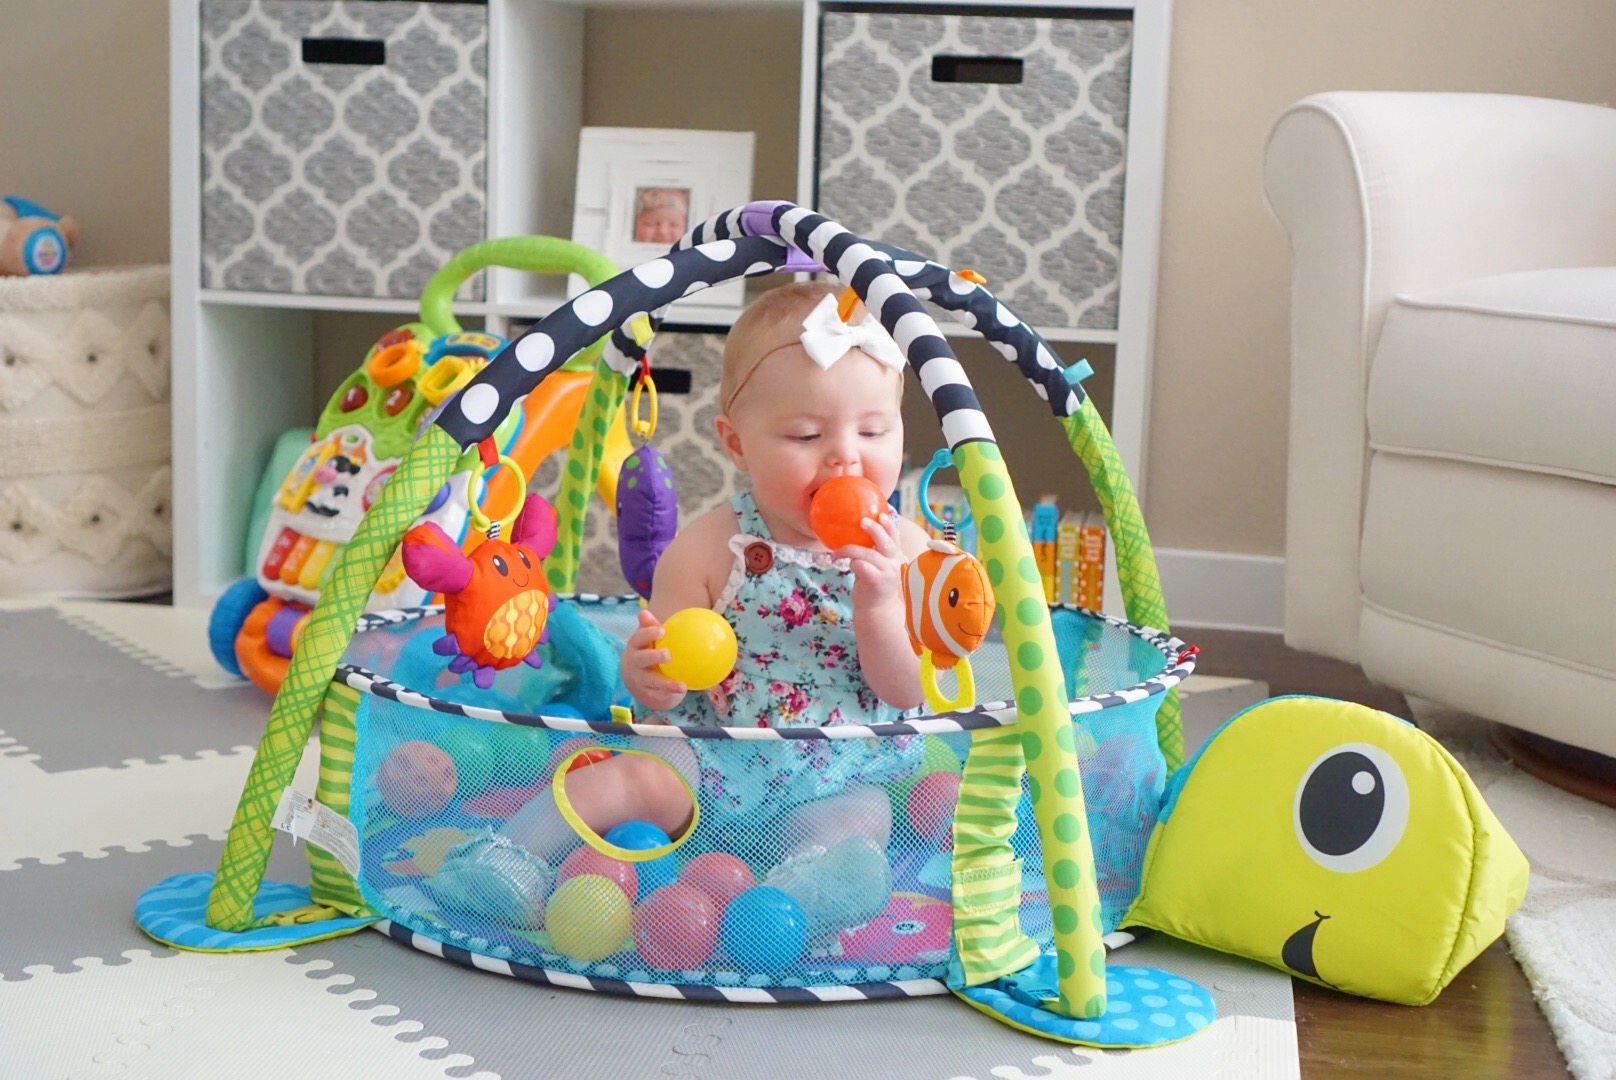 Katelyn Jones A Touch of Pink buybuy BABY The Infantino Grow-With-Me Activity Gym and Ball Pit